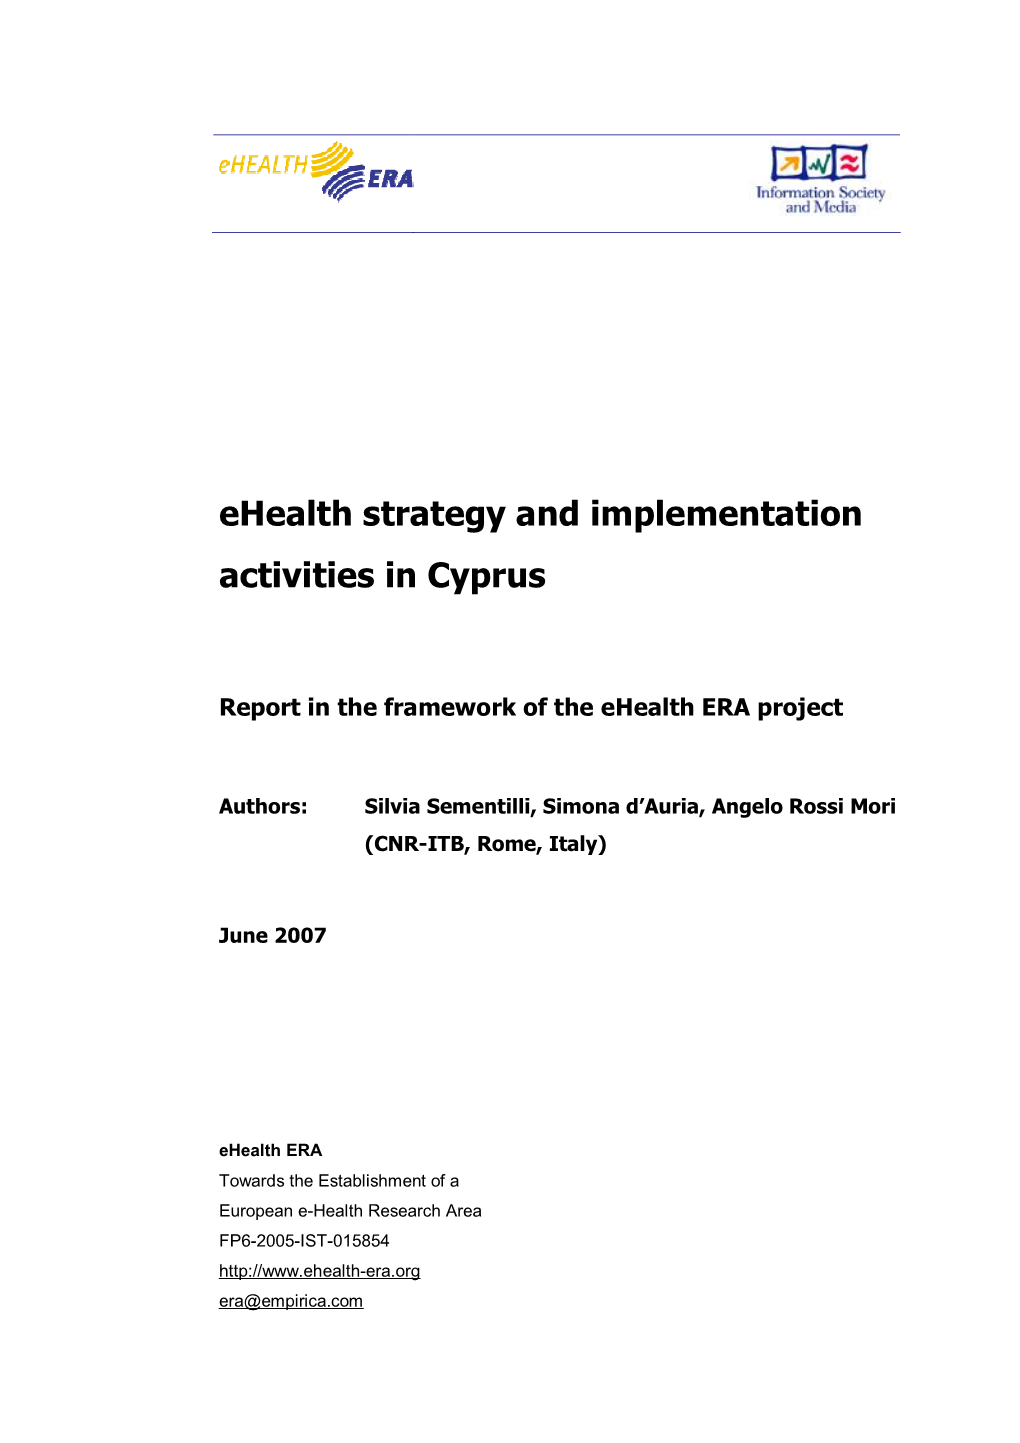 Ehealth Strategy and Implementation Activities in Cyprus